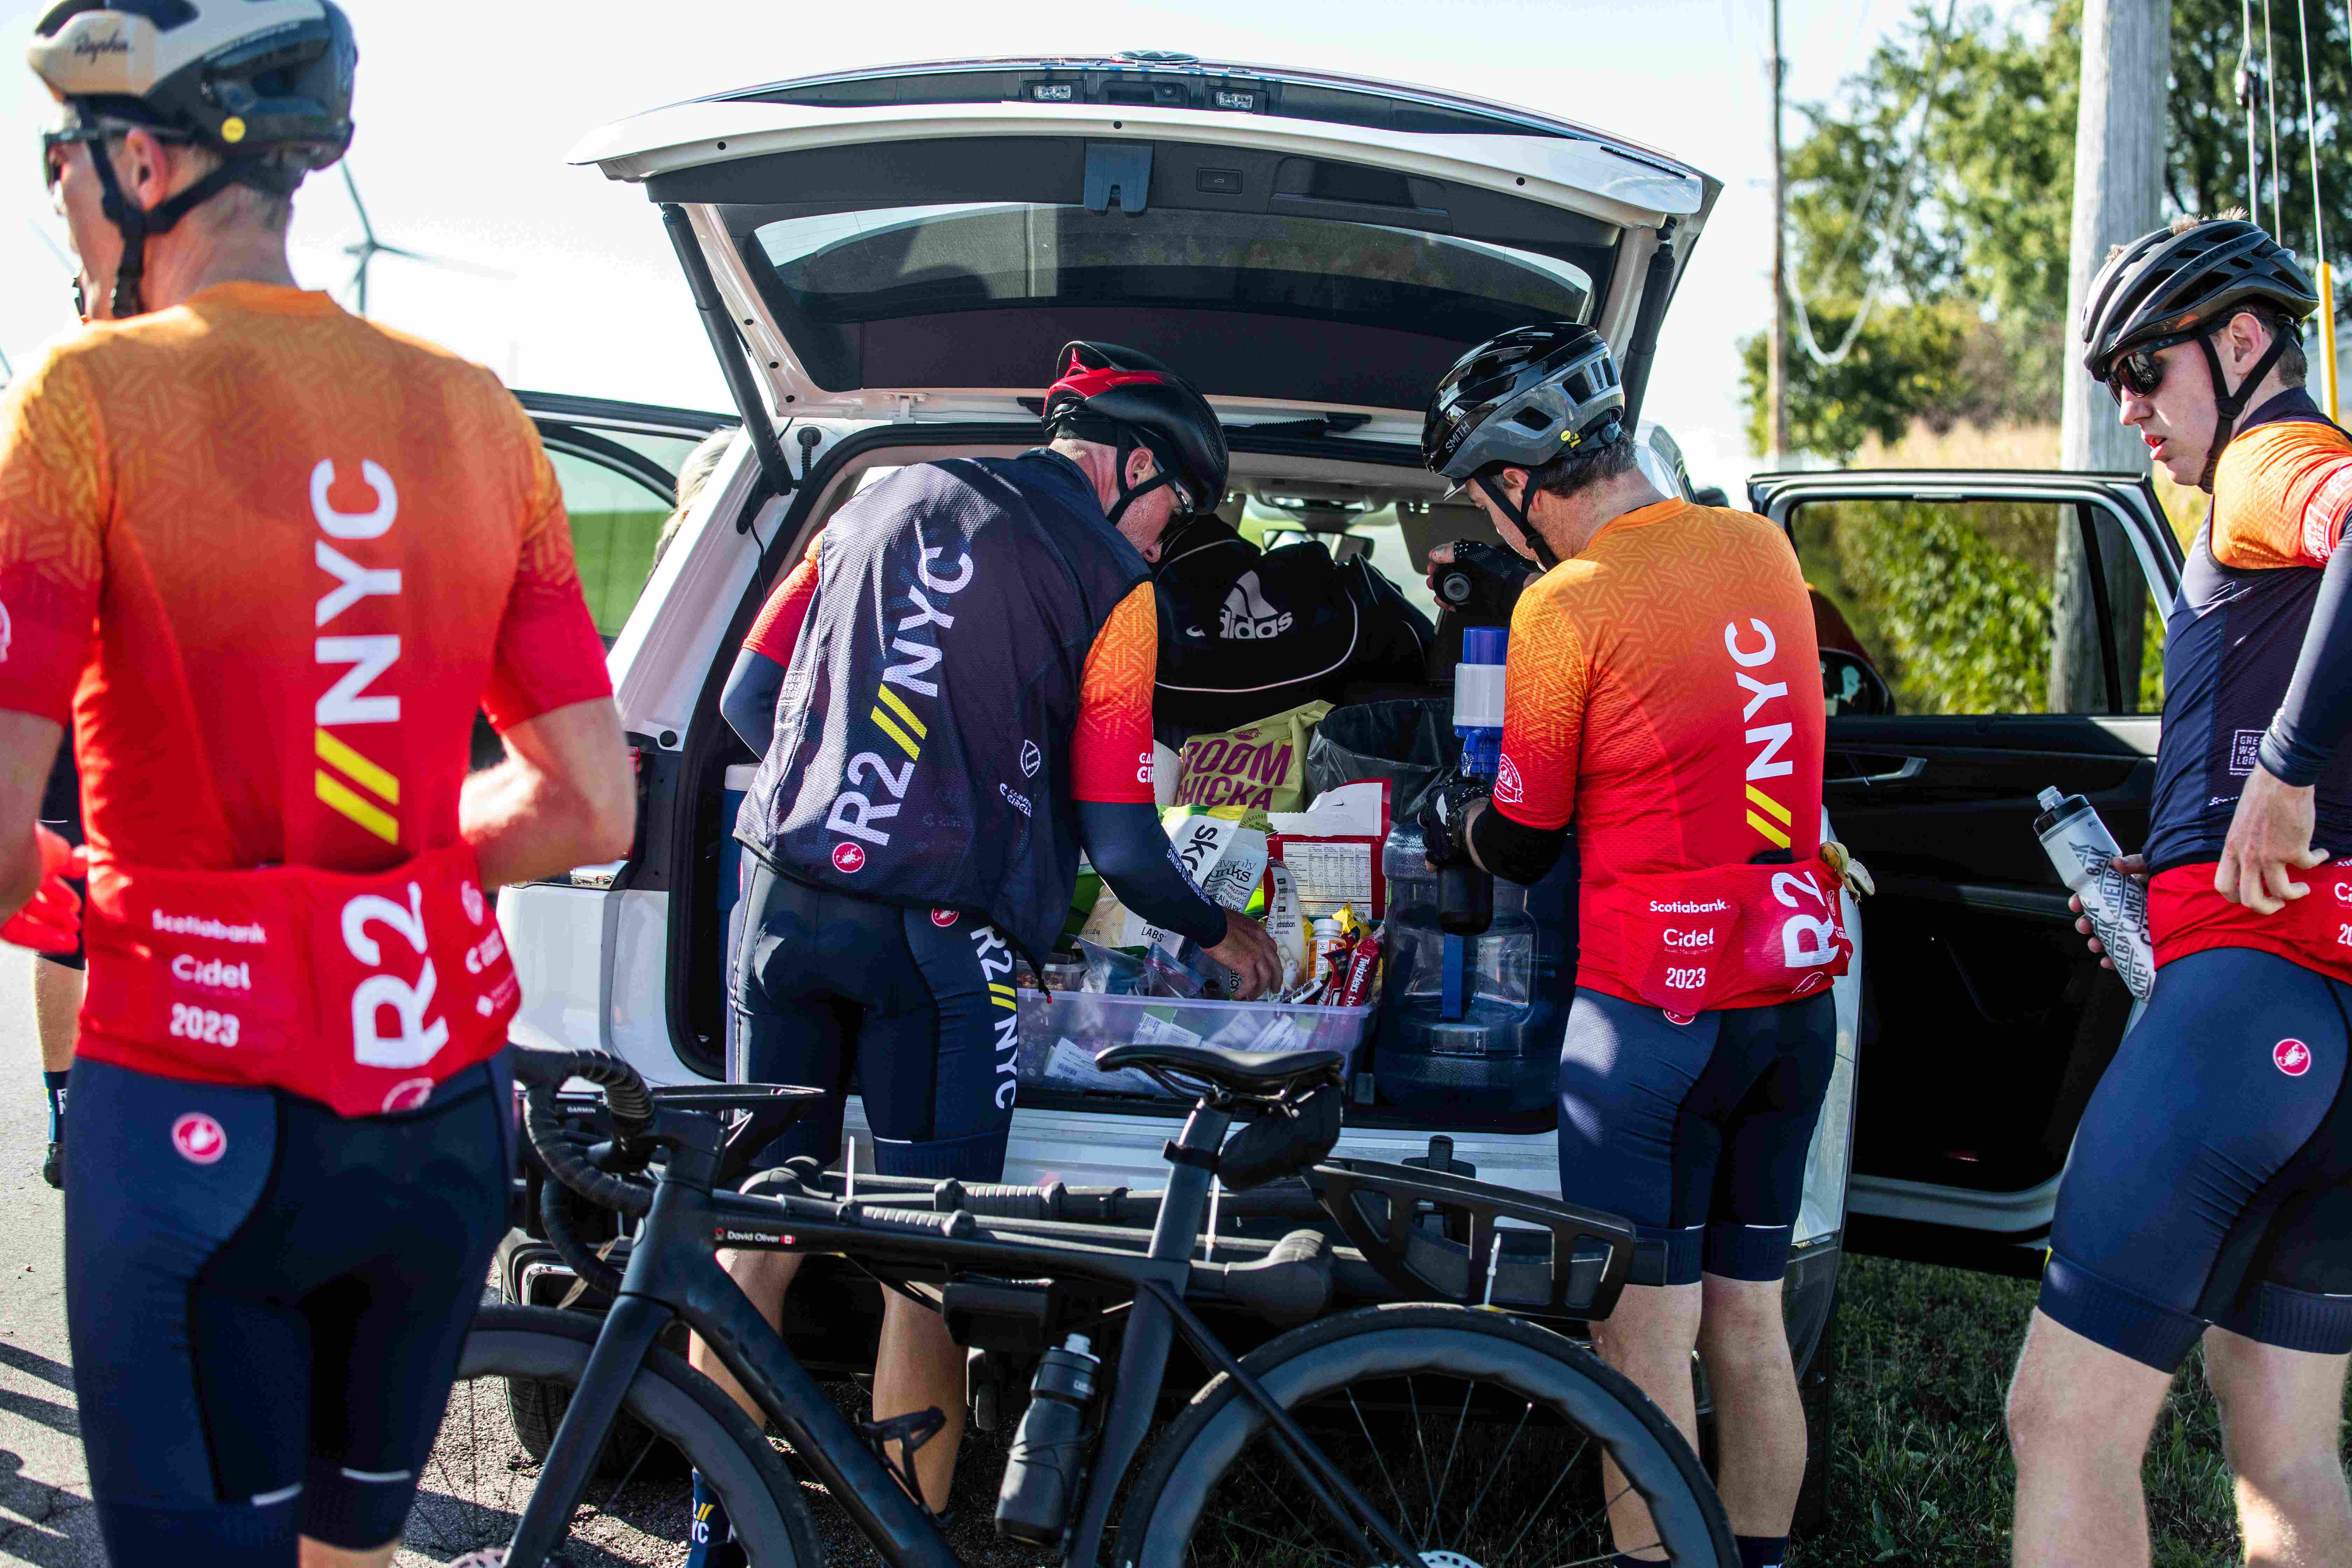 cyclists stopped for a break at trunk of support vehicle